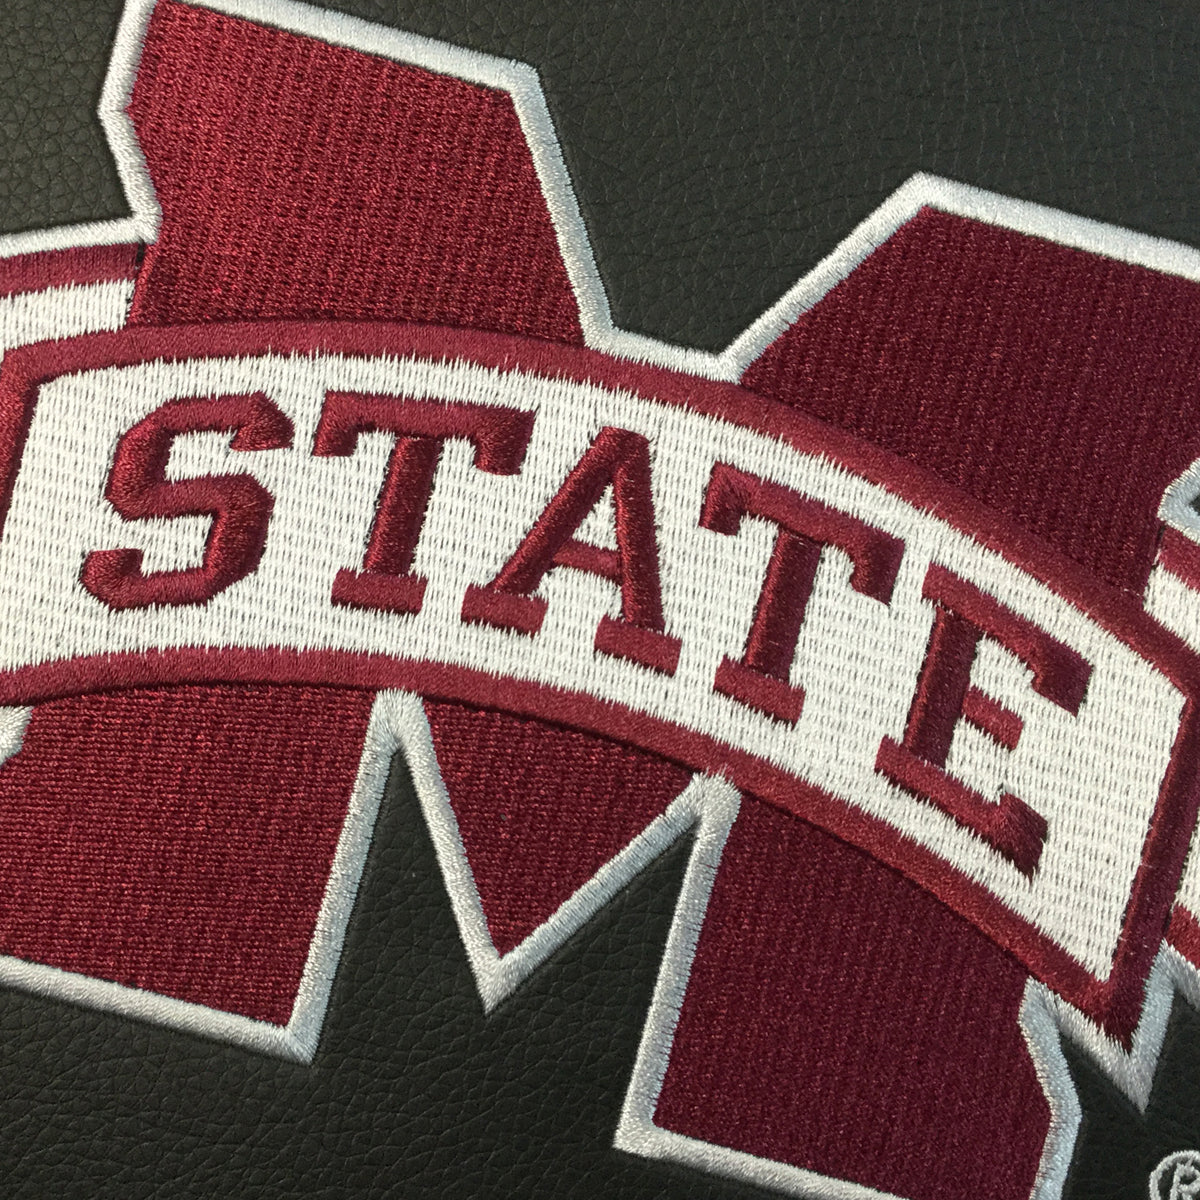 Logo Panel with Mississippi State Primary